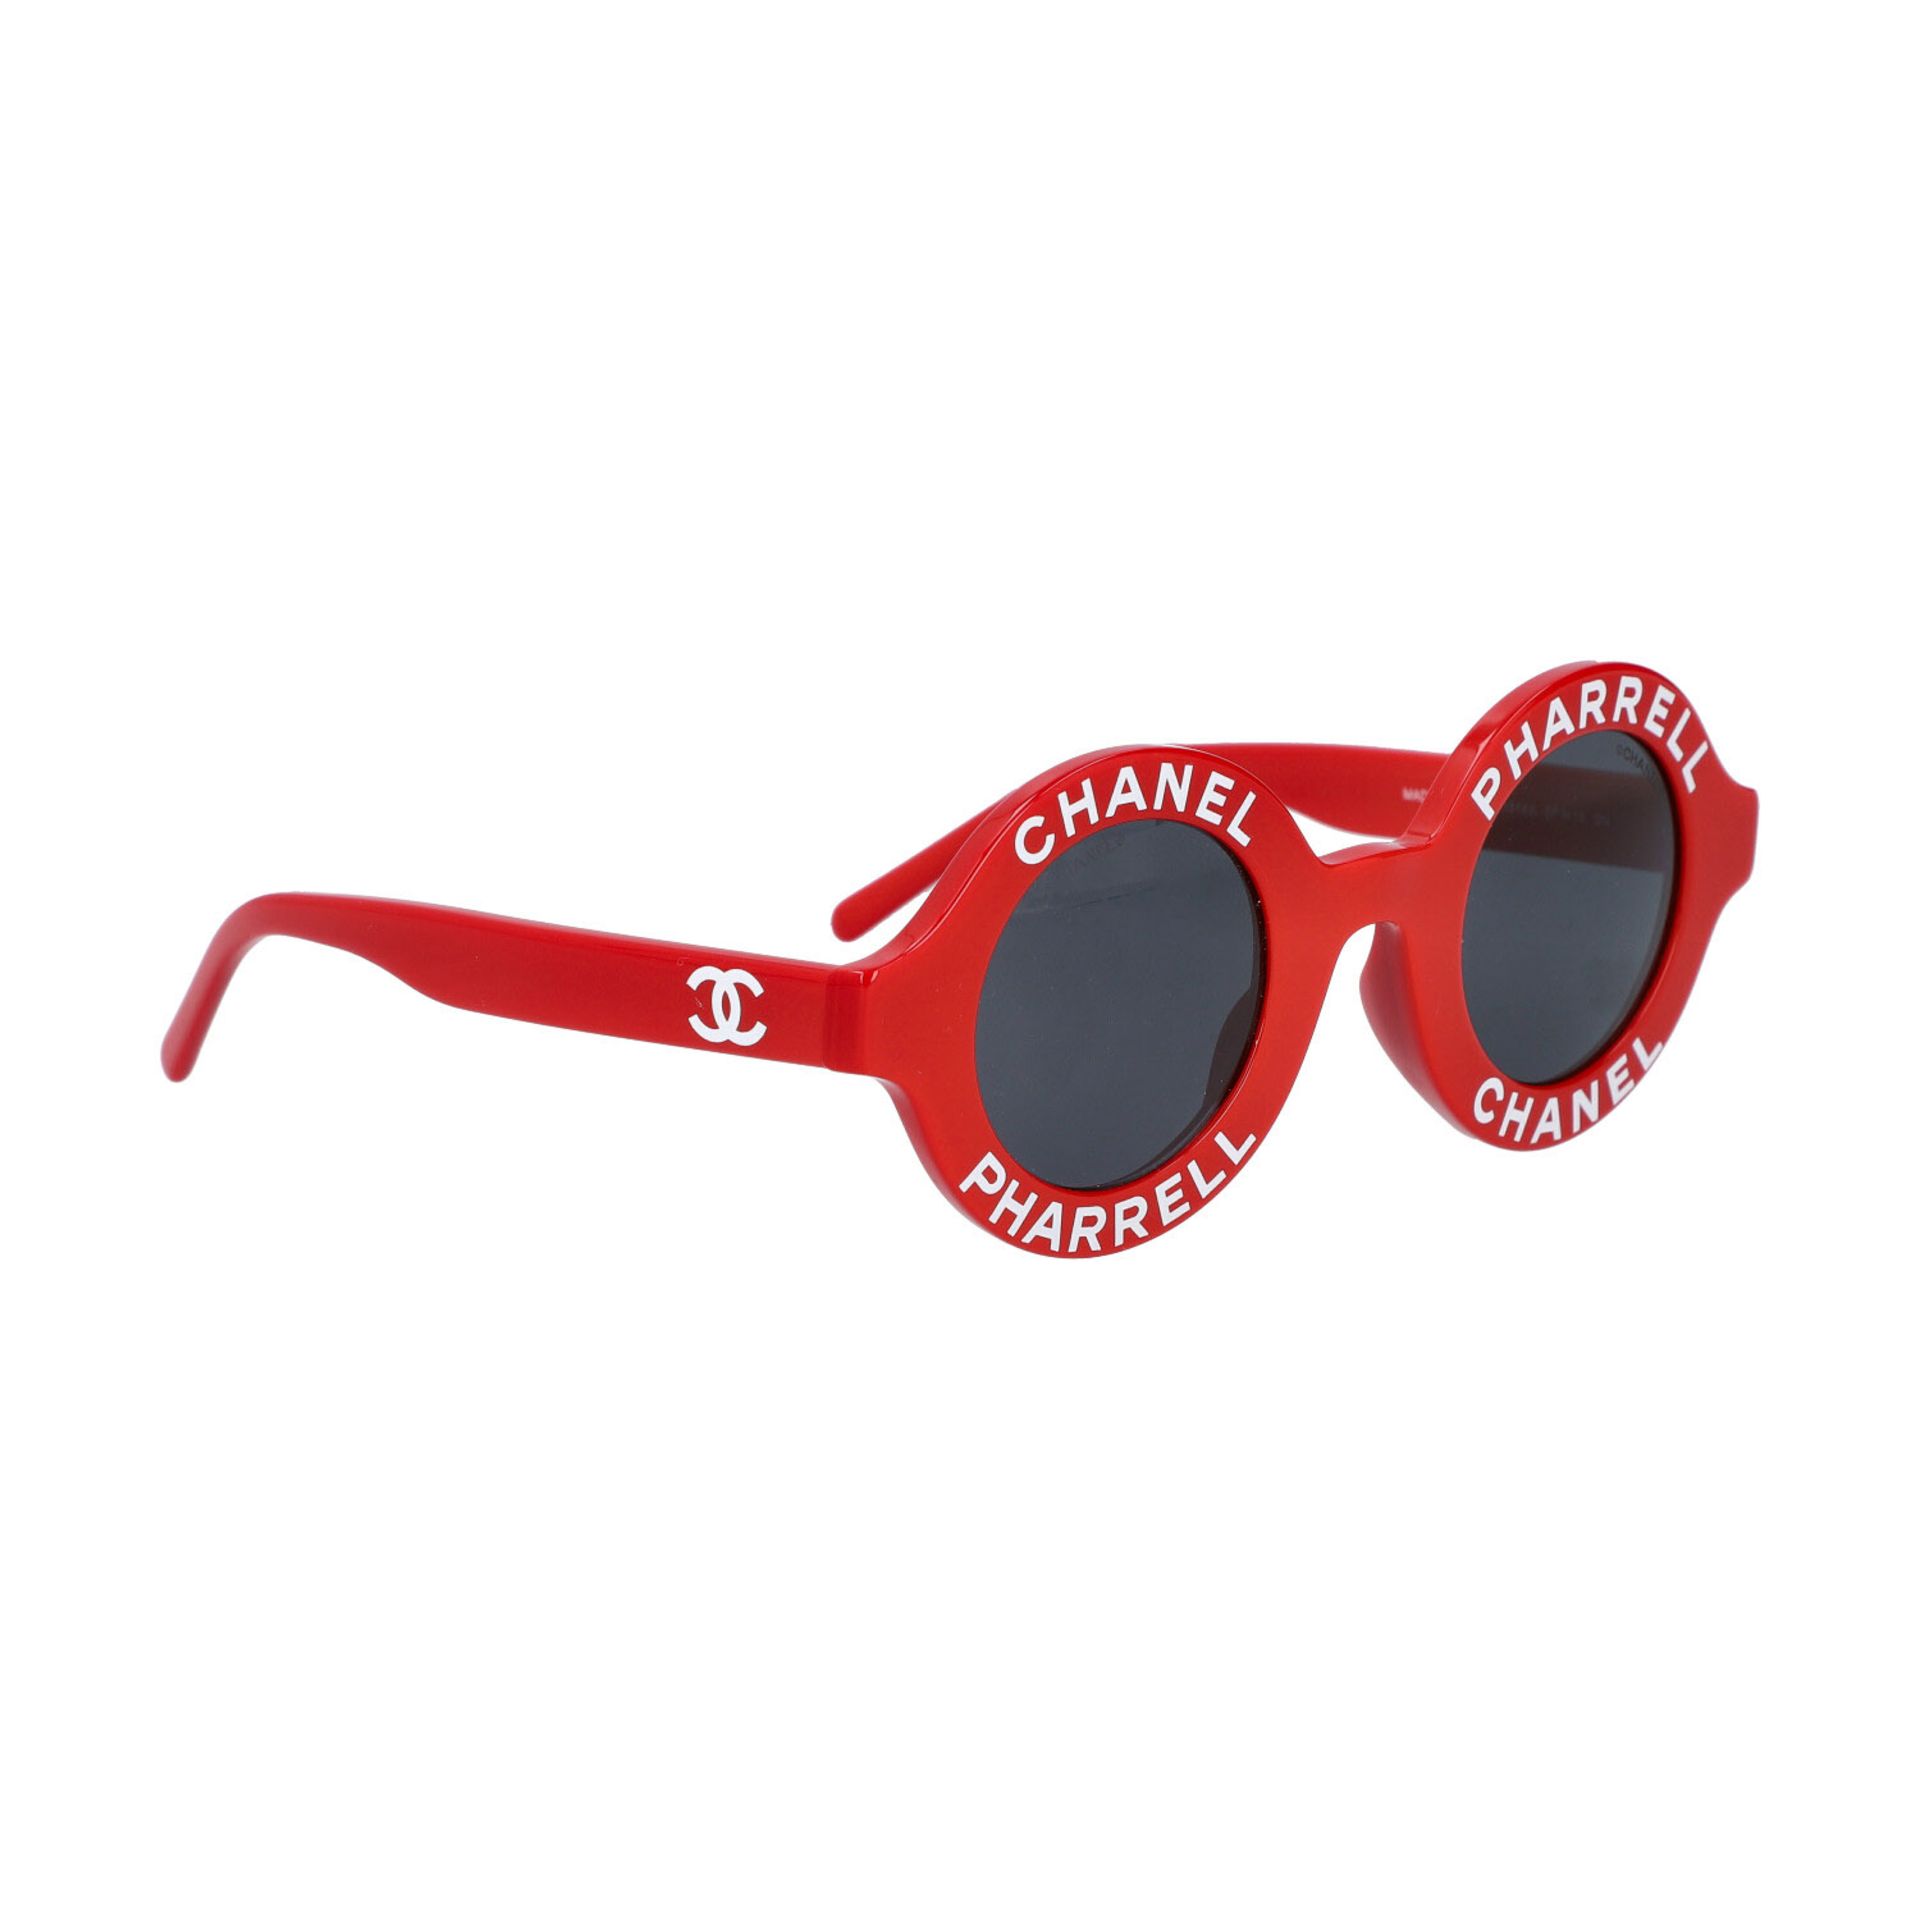 CHANEL x PHARRELL CAPSULE COLLECTION Sonnenbrille. - Image 2 of 5